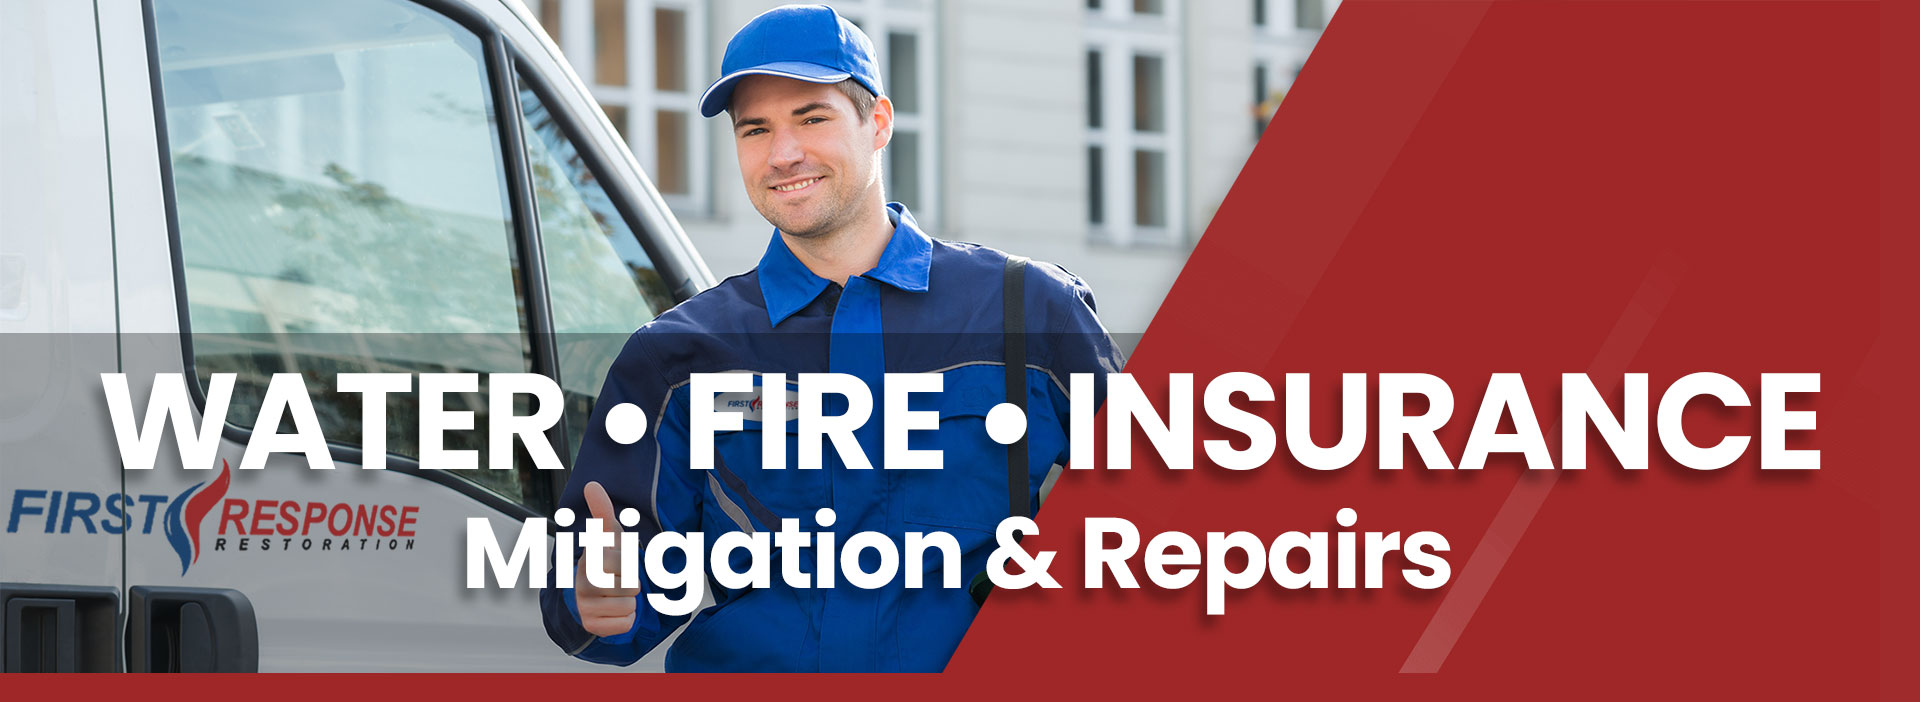 Water Removal and Restoration Technician - Water, Fire and Insurance Repairs